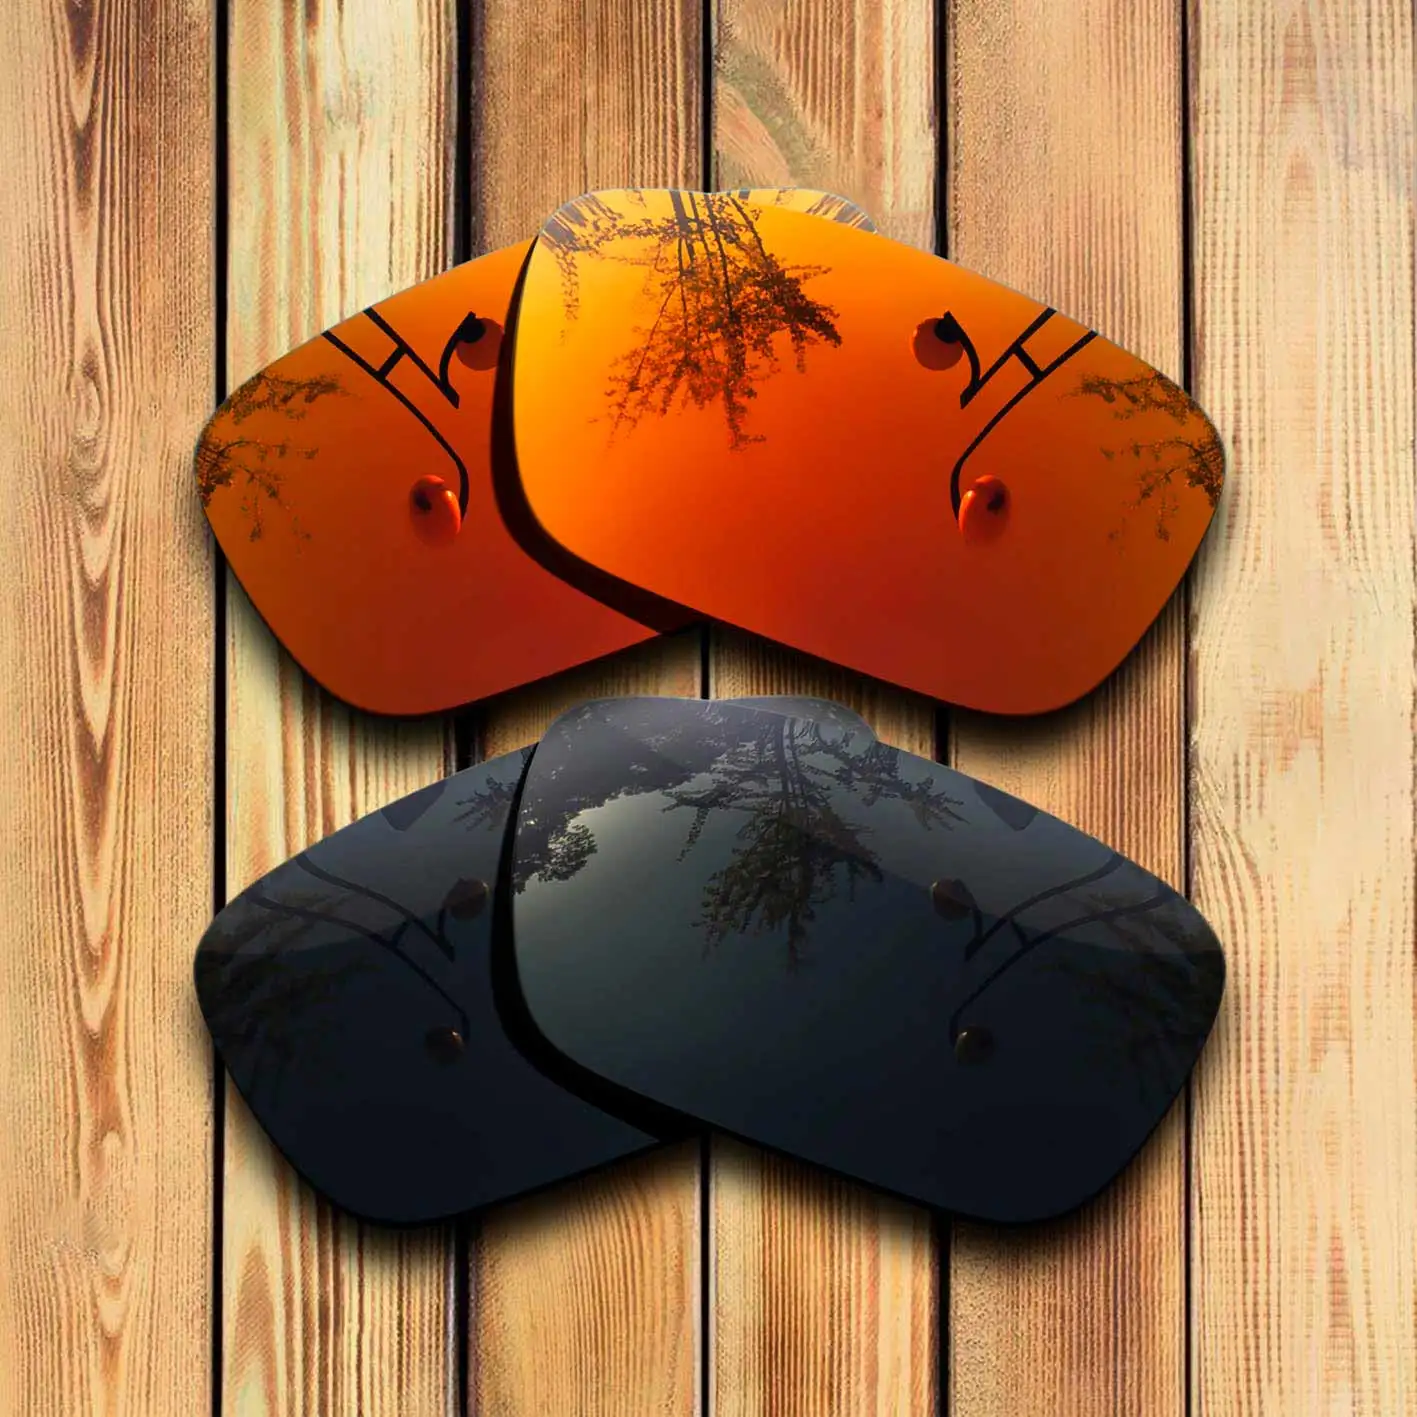 100% Precisely Cut Polarized Replacement Lenses for jury Sunglasses  Red& Solid Black Combine Options